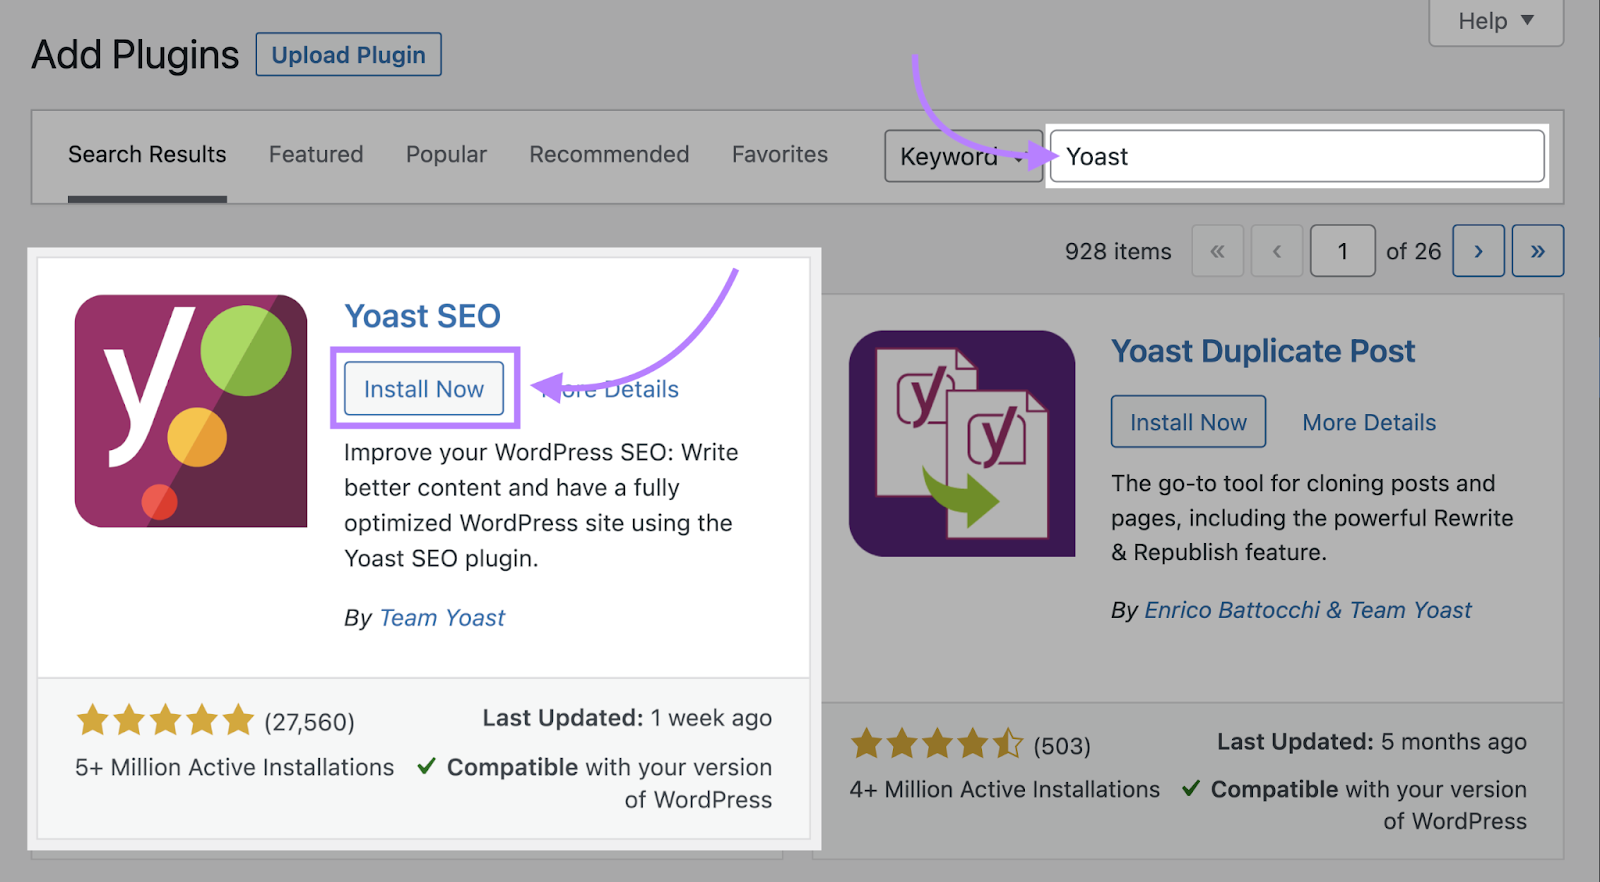 "Install Now" button selected under Yoast SEO